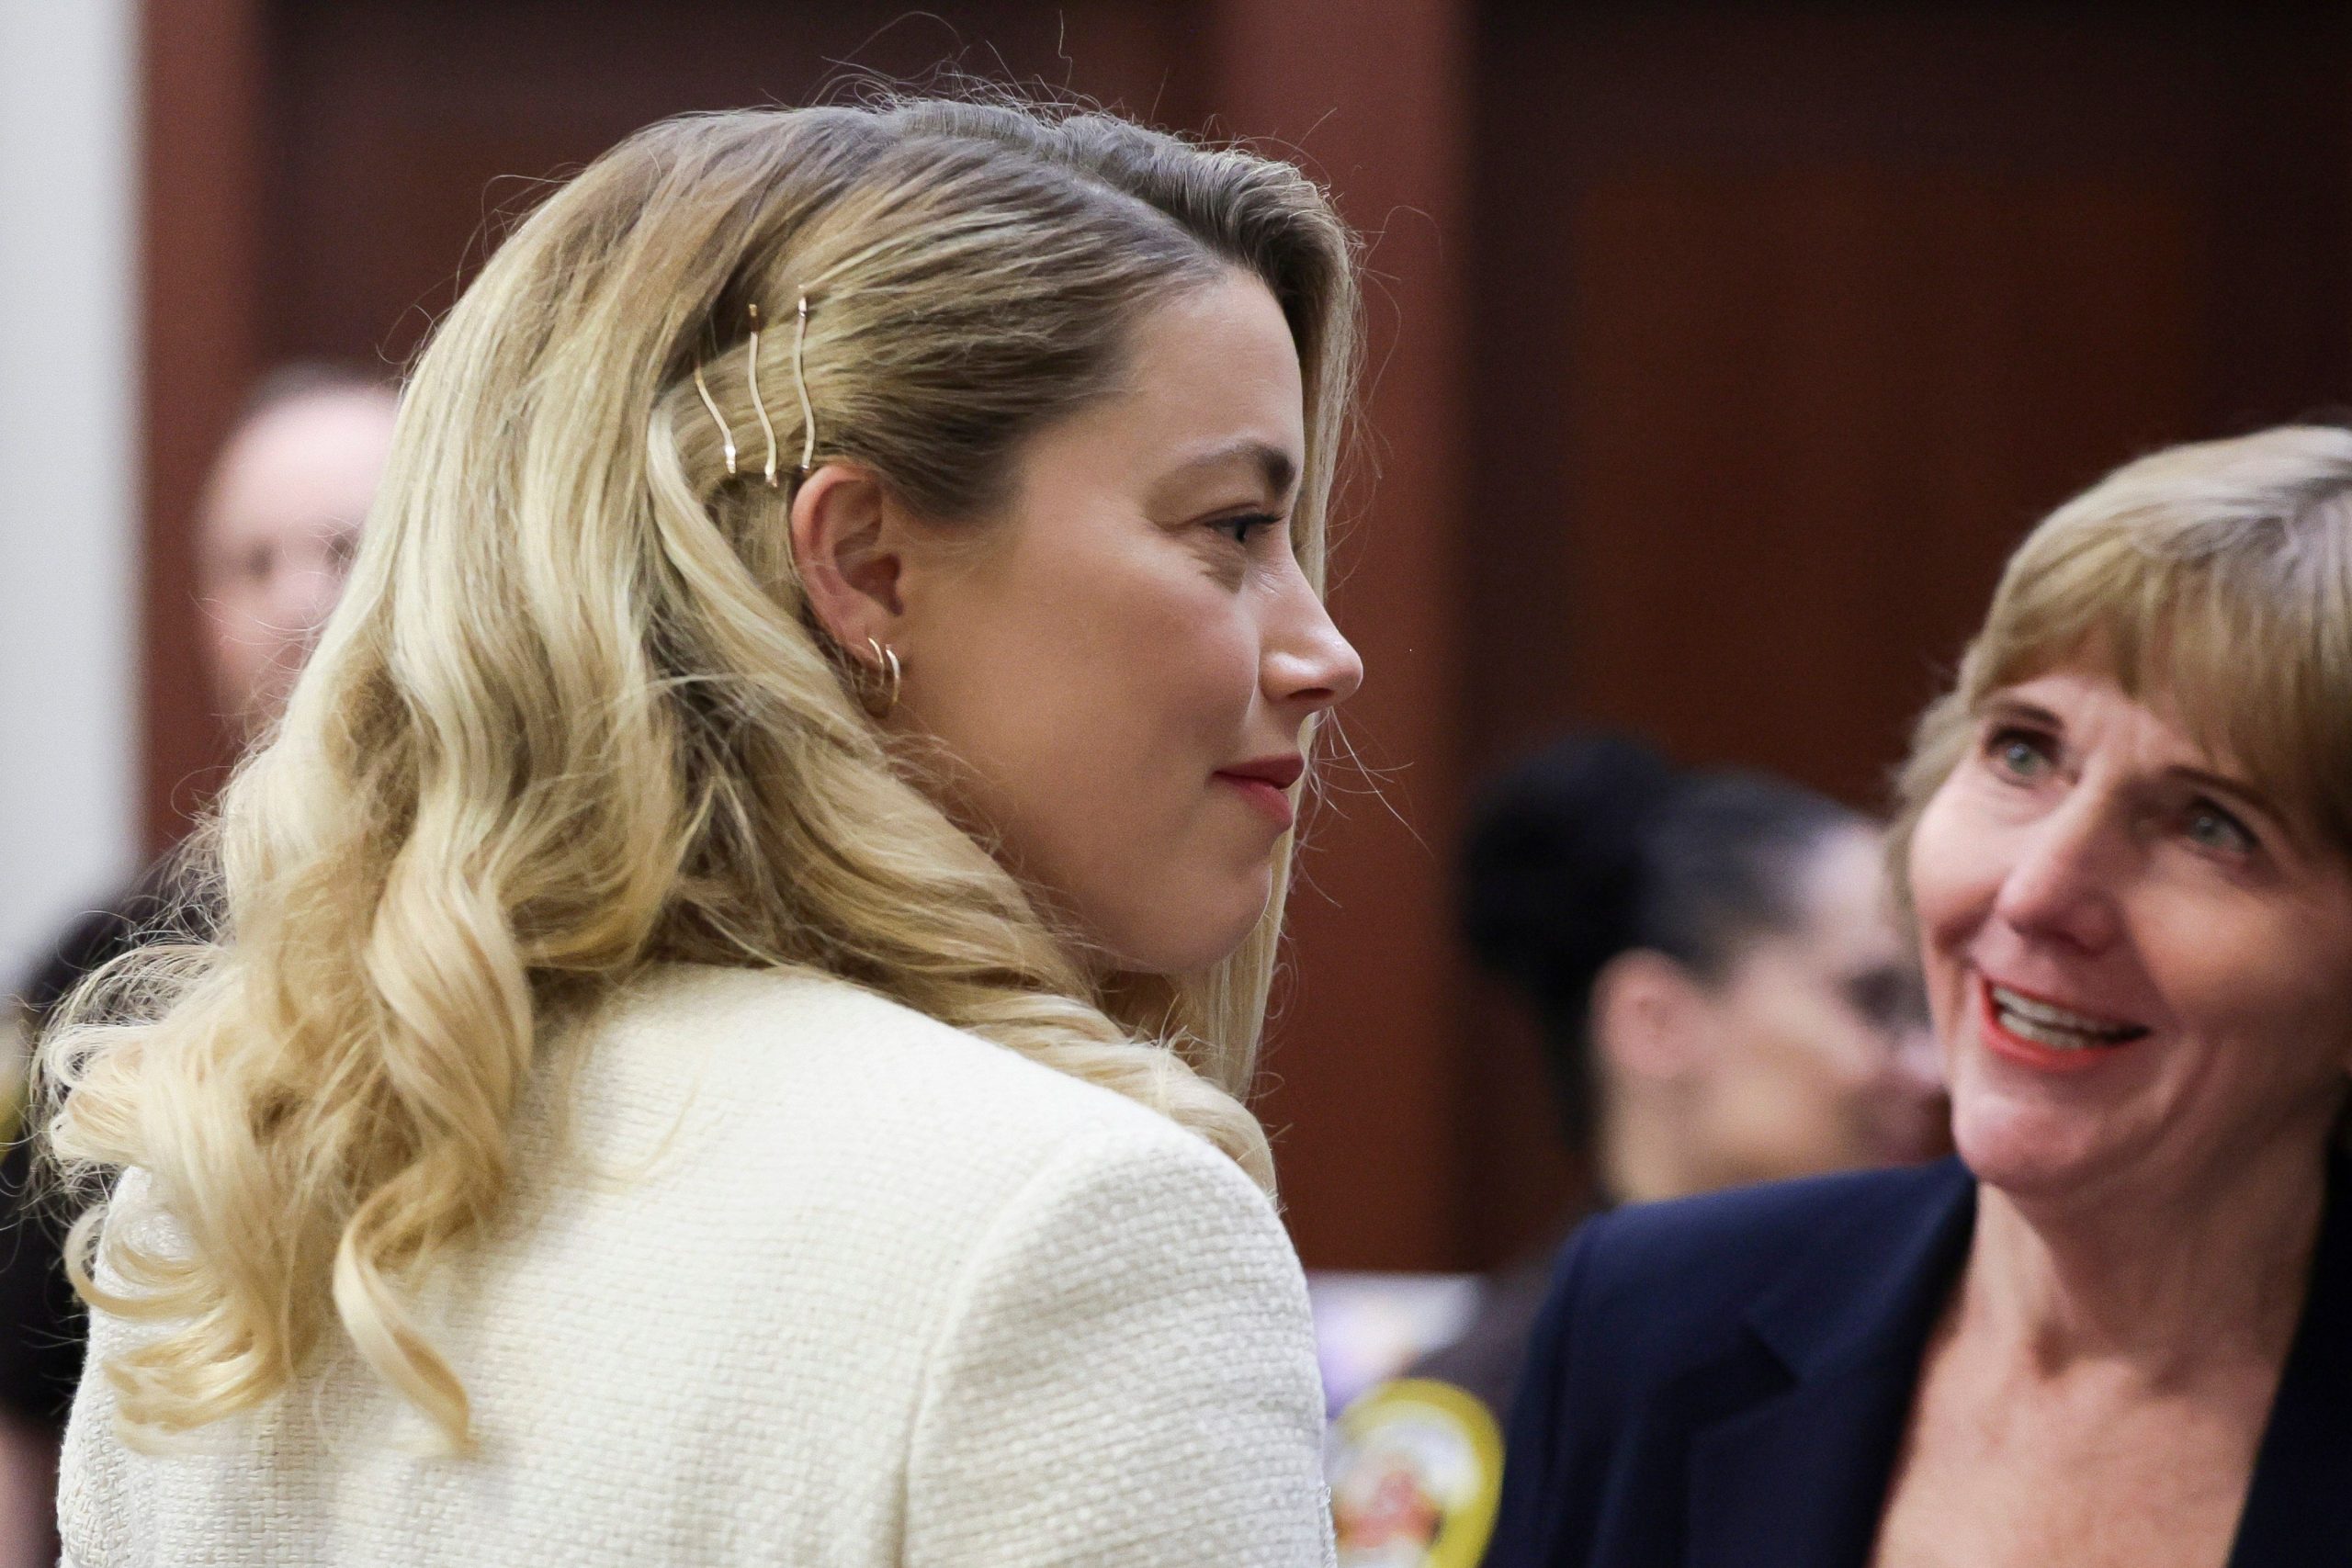 Amber Heard disappointed ‘beyond words’ after defamation verdict